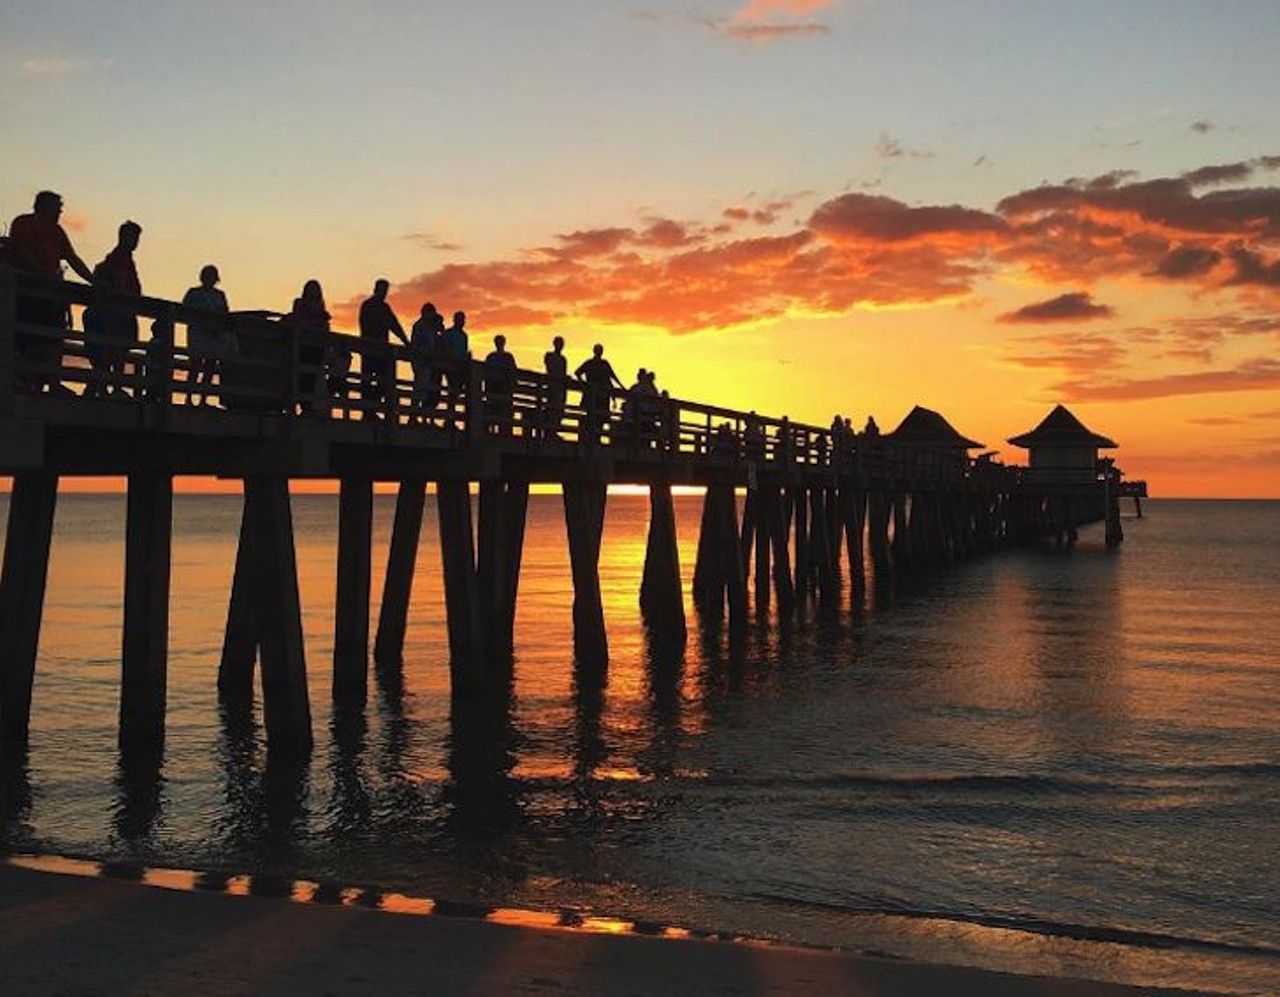 Naples Pier
25 12th Ave. S, Naples, (239) 213-3062
A historic landmark that jets out over the Gulf of Mexico, this pier offers fishermen a great place to cast a line and sightseers a beautiful spot to watch the sunset. 
Photo via nicolasampson/Instagram